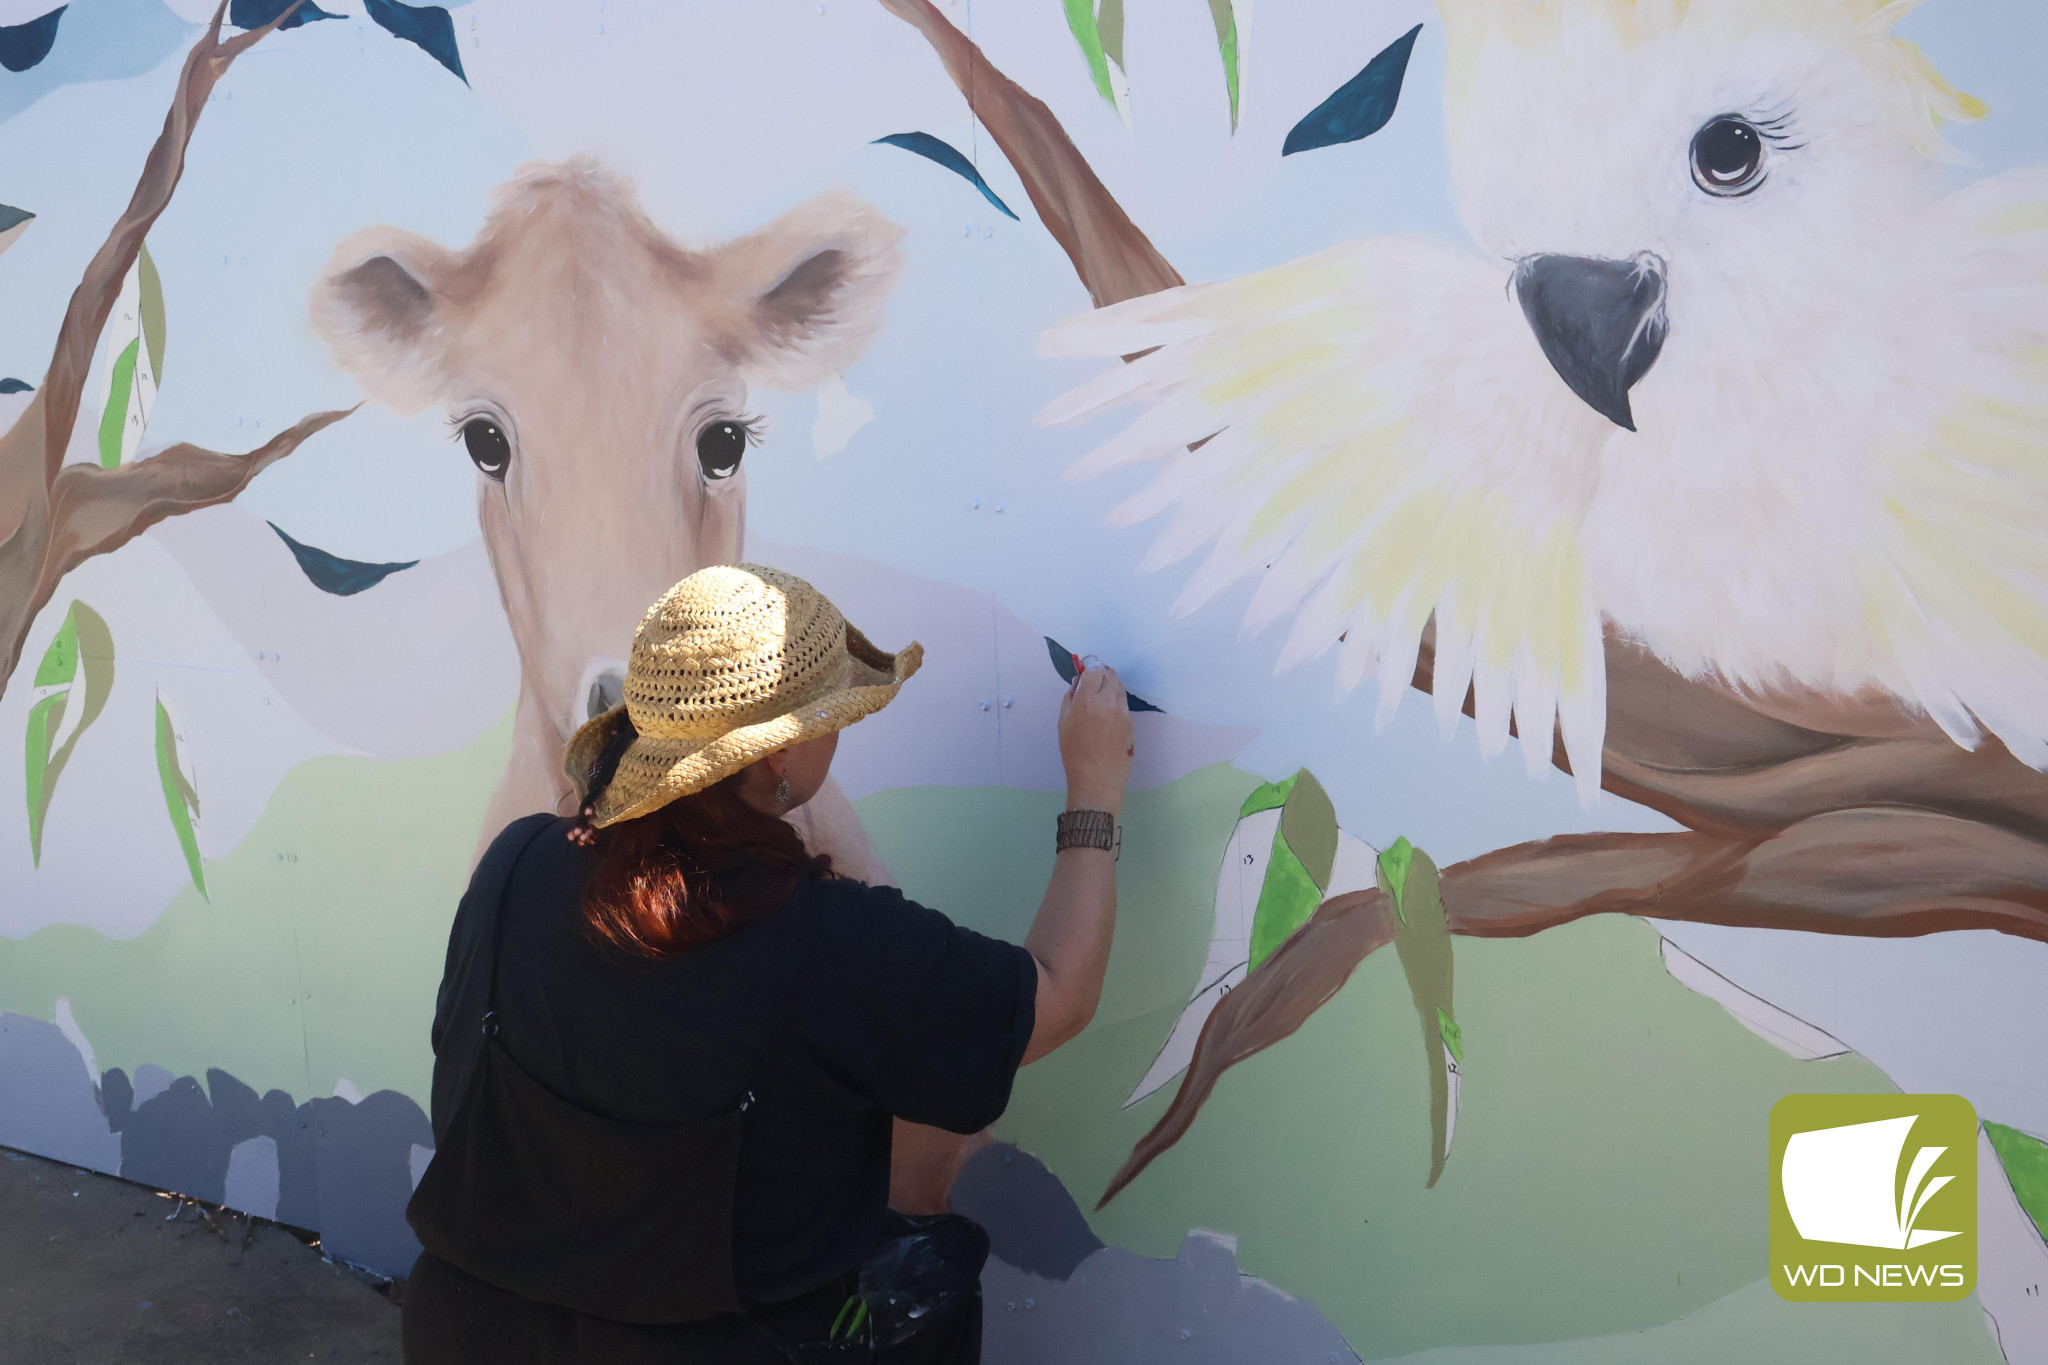 Capturing the area: Glenormiston artist Jess Fowler has been working on a mural for Merindah Lodge, featuring animals commonly seen around Camperdown and the surrounding area.